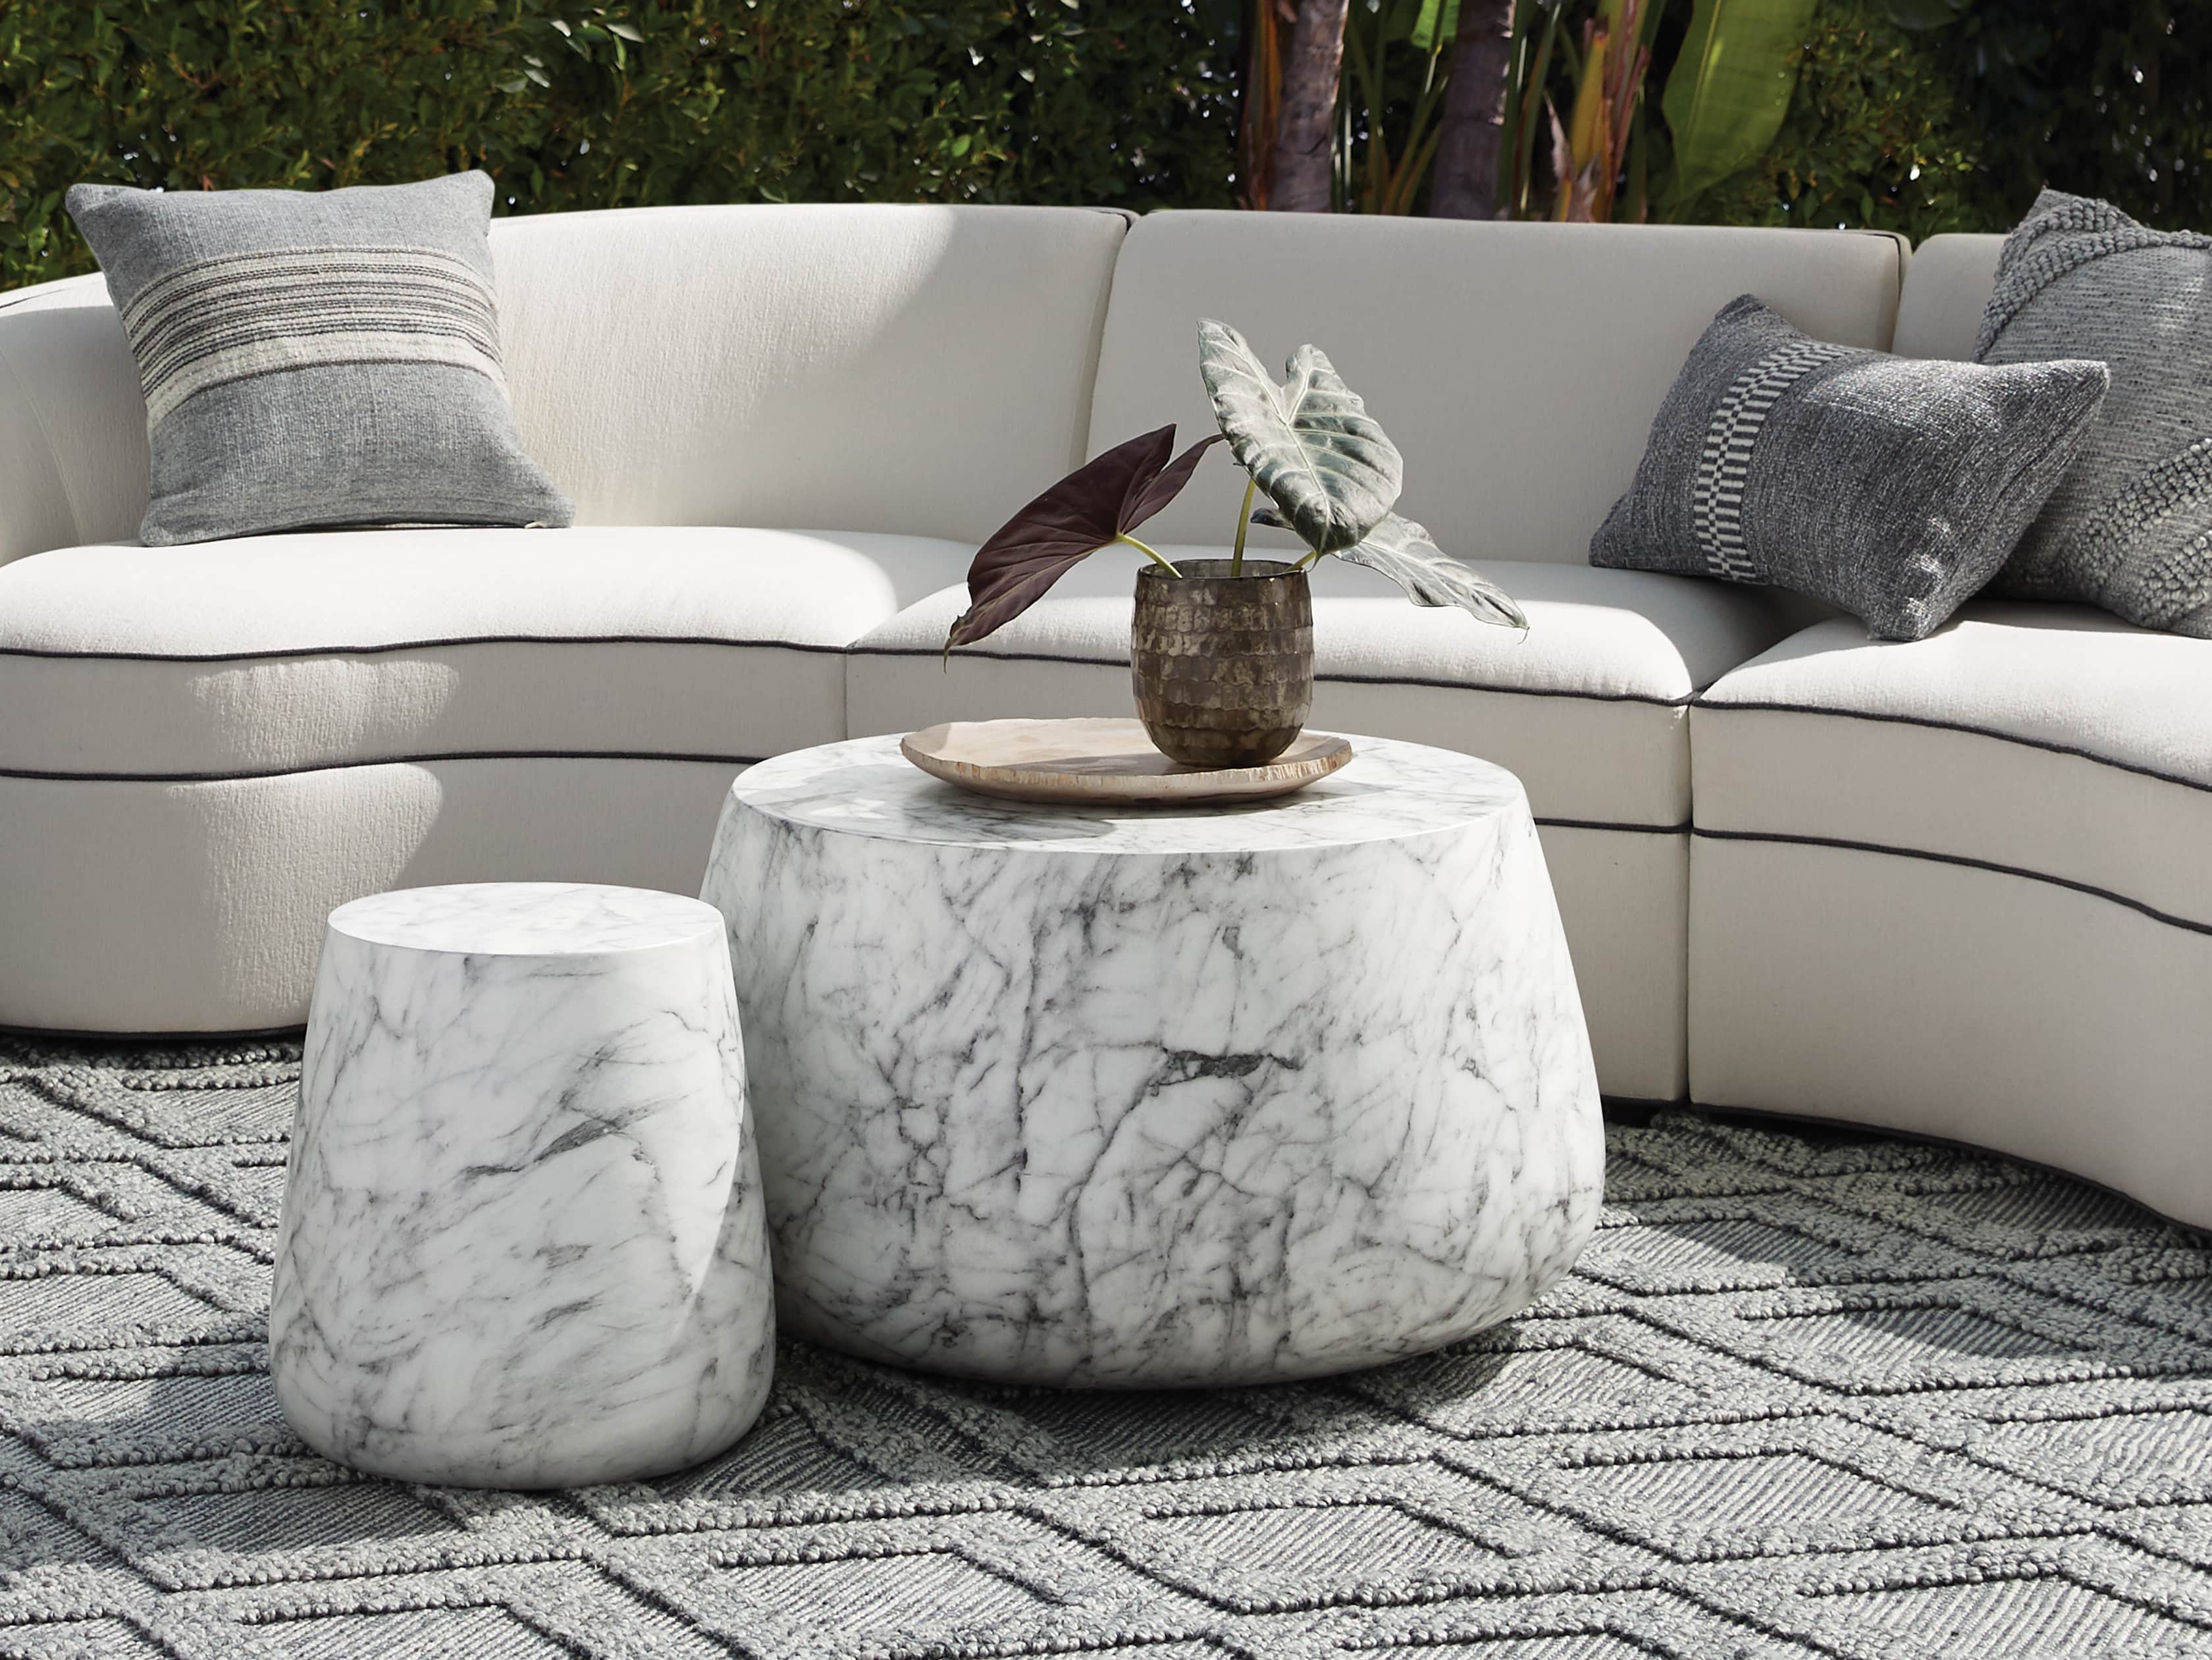 Coffee Table with Swivel Top Plate Living Room Table Side Table Concrete Effect 